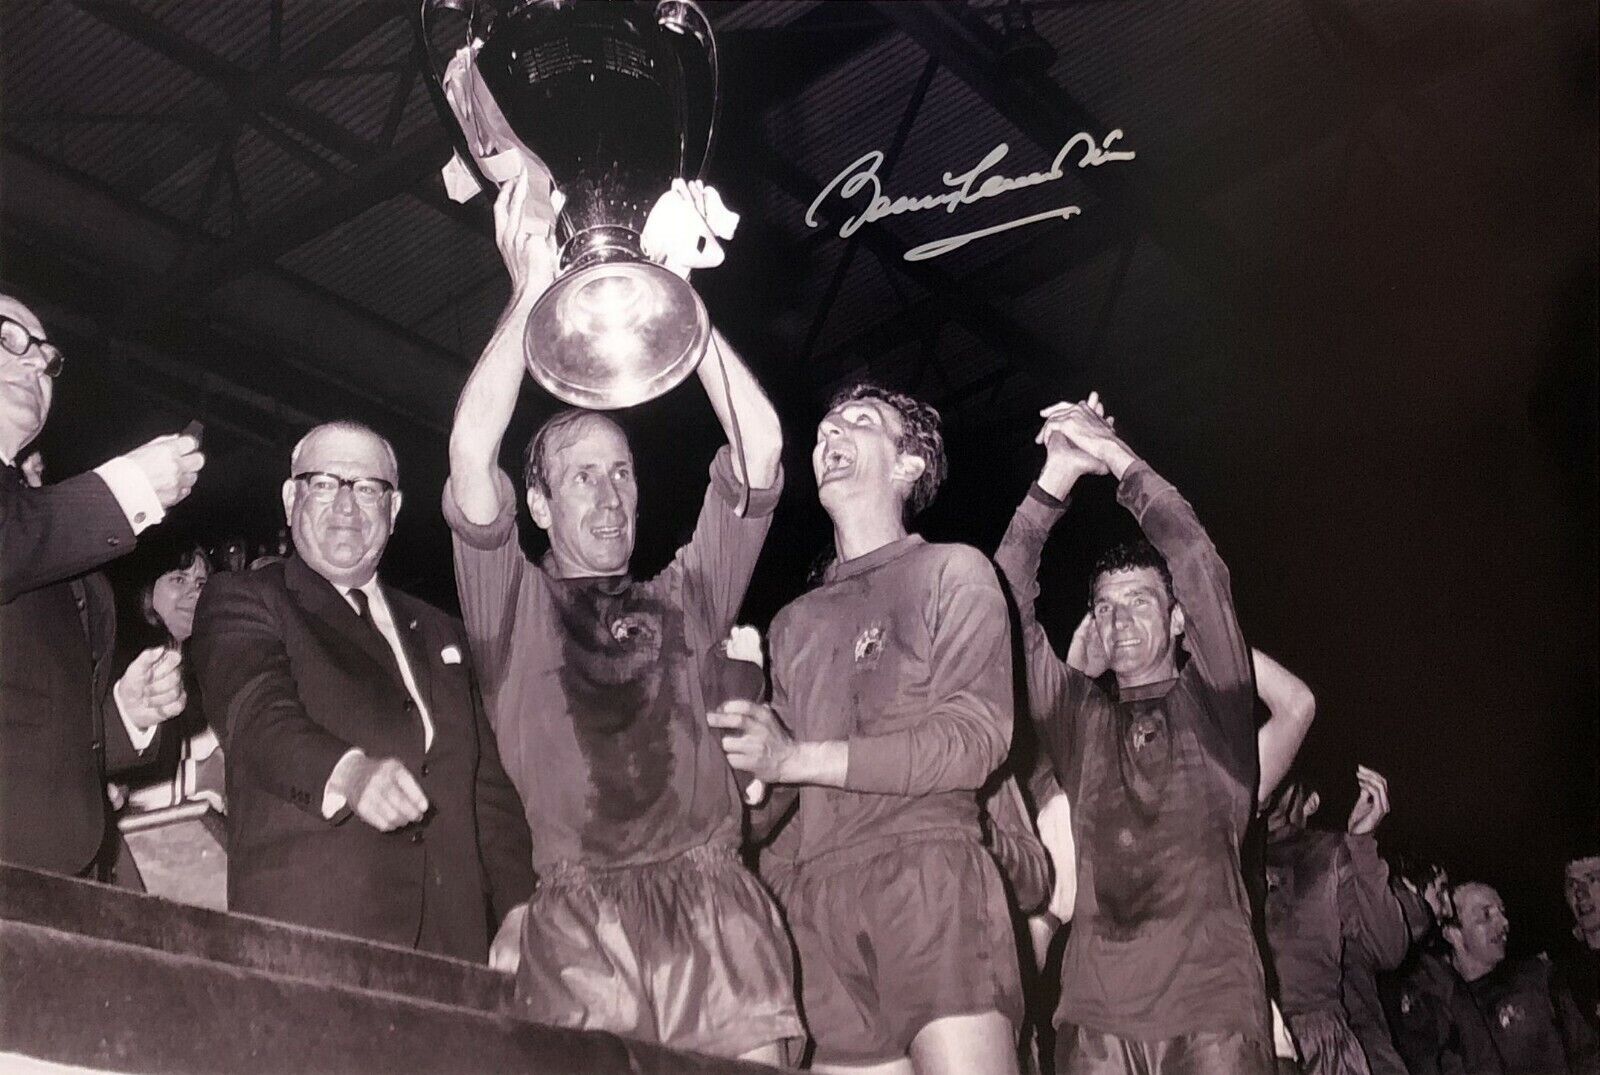 BOBBY CHARLTON SIGNED MANCHESTER UNITED 1968 EUROPEAN CUP FINAL 30x20 Photo Poster painting